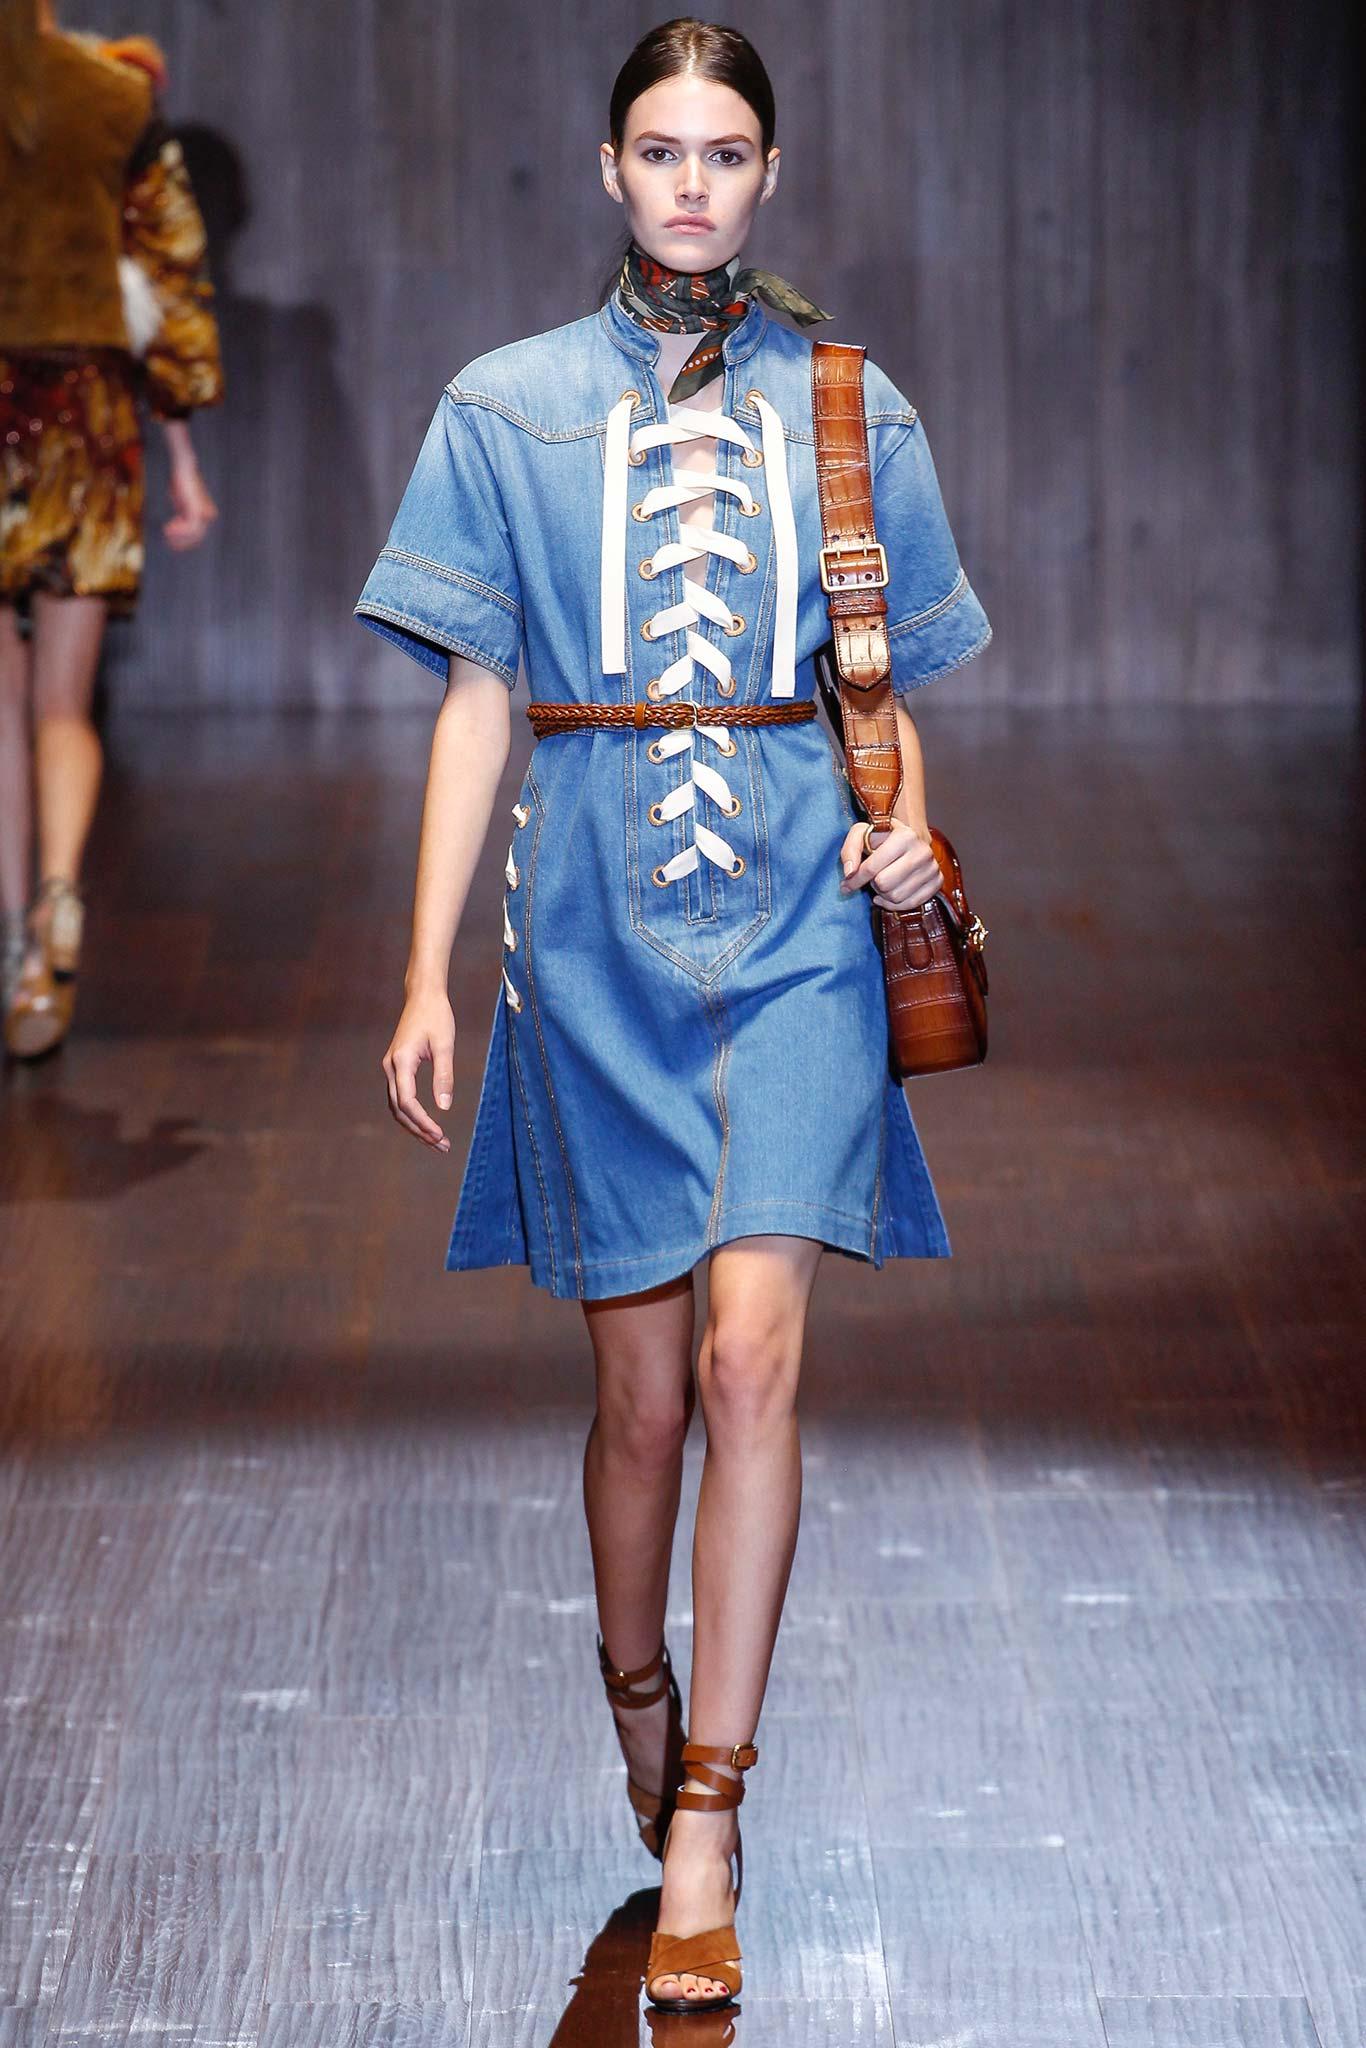 New Rare Gucci Runway Ad Denim Dress S/S 2015 Sz 40 $2950 In New Condition For Sale In Leesburg, VA